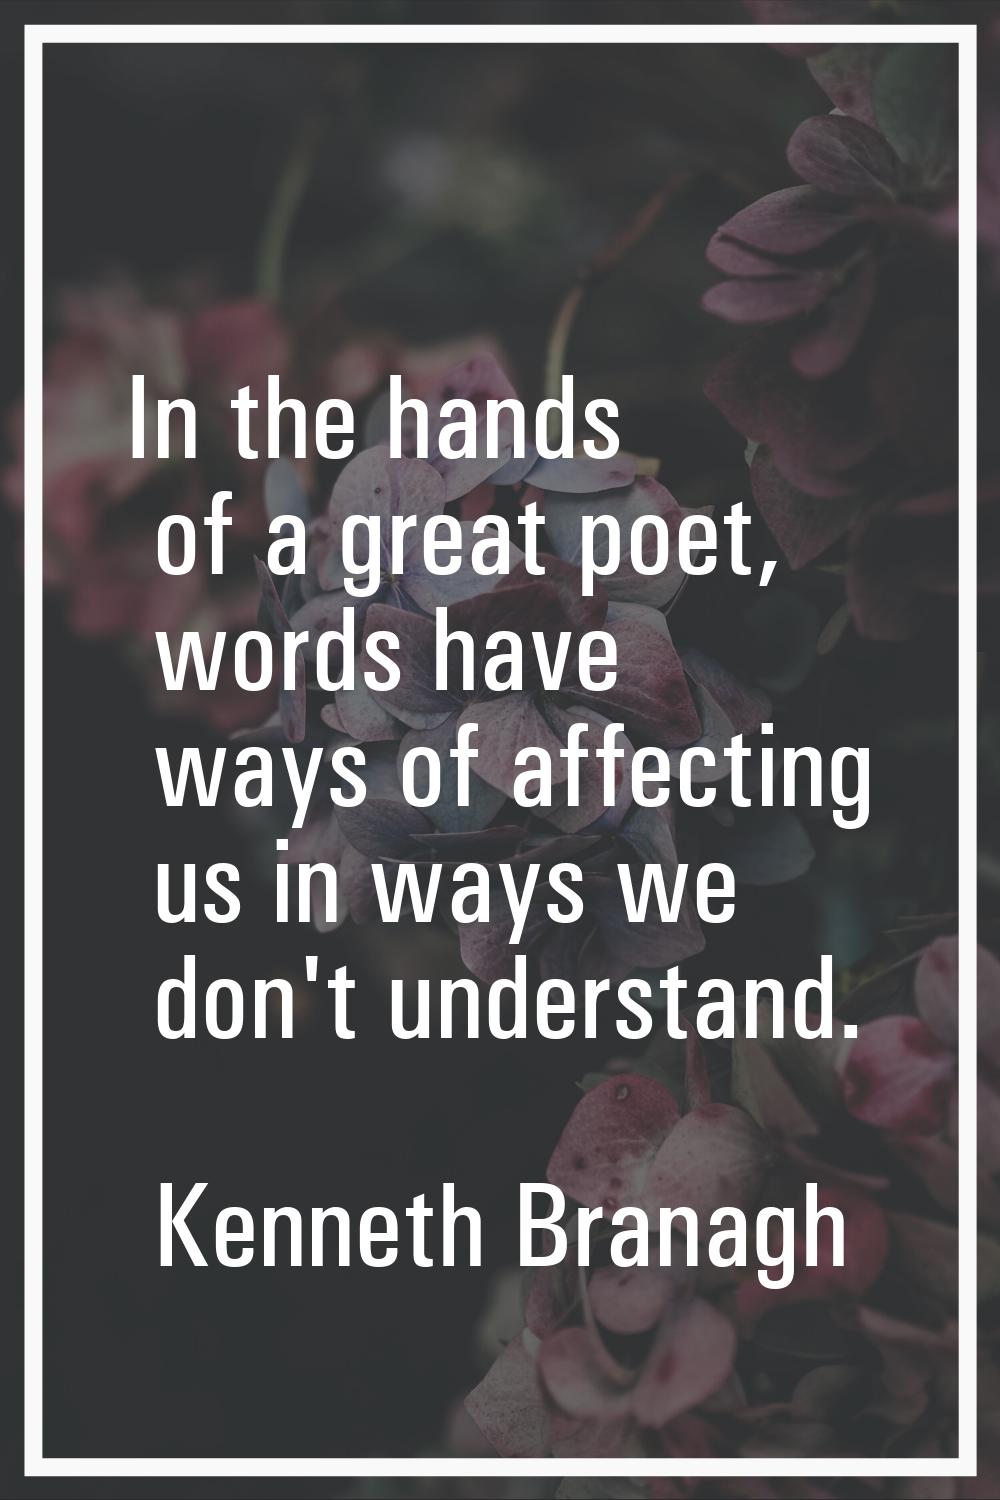 In the hands of a great poet, words have ways of affecting us in ways we don't understand.